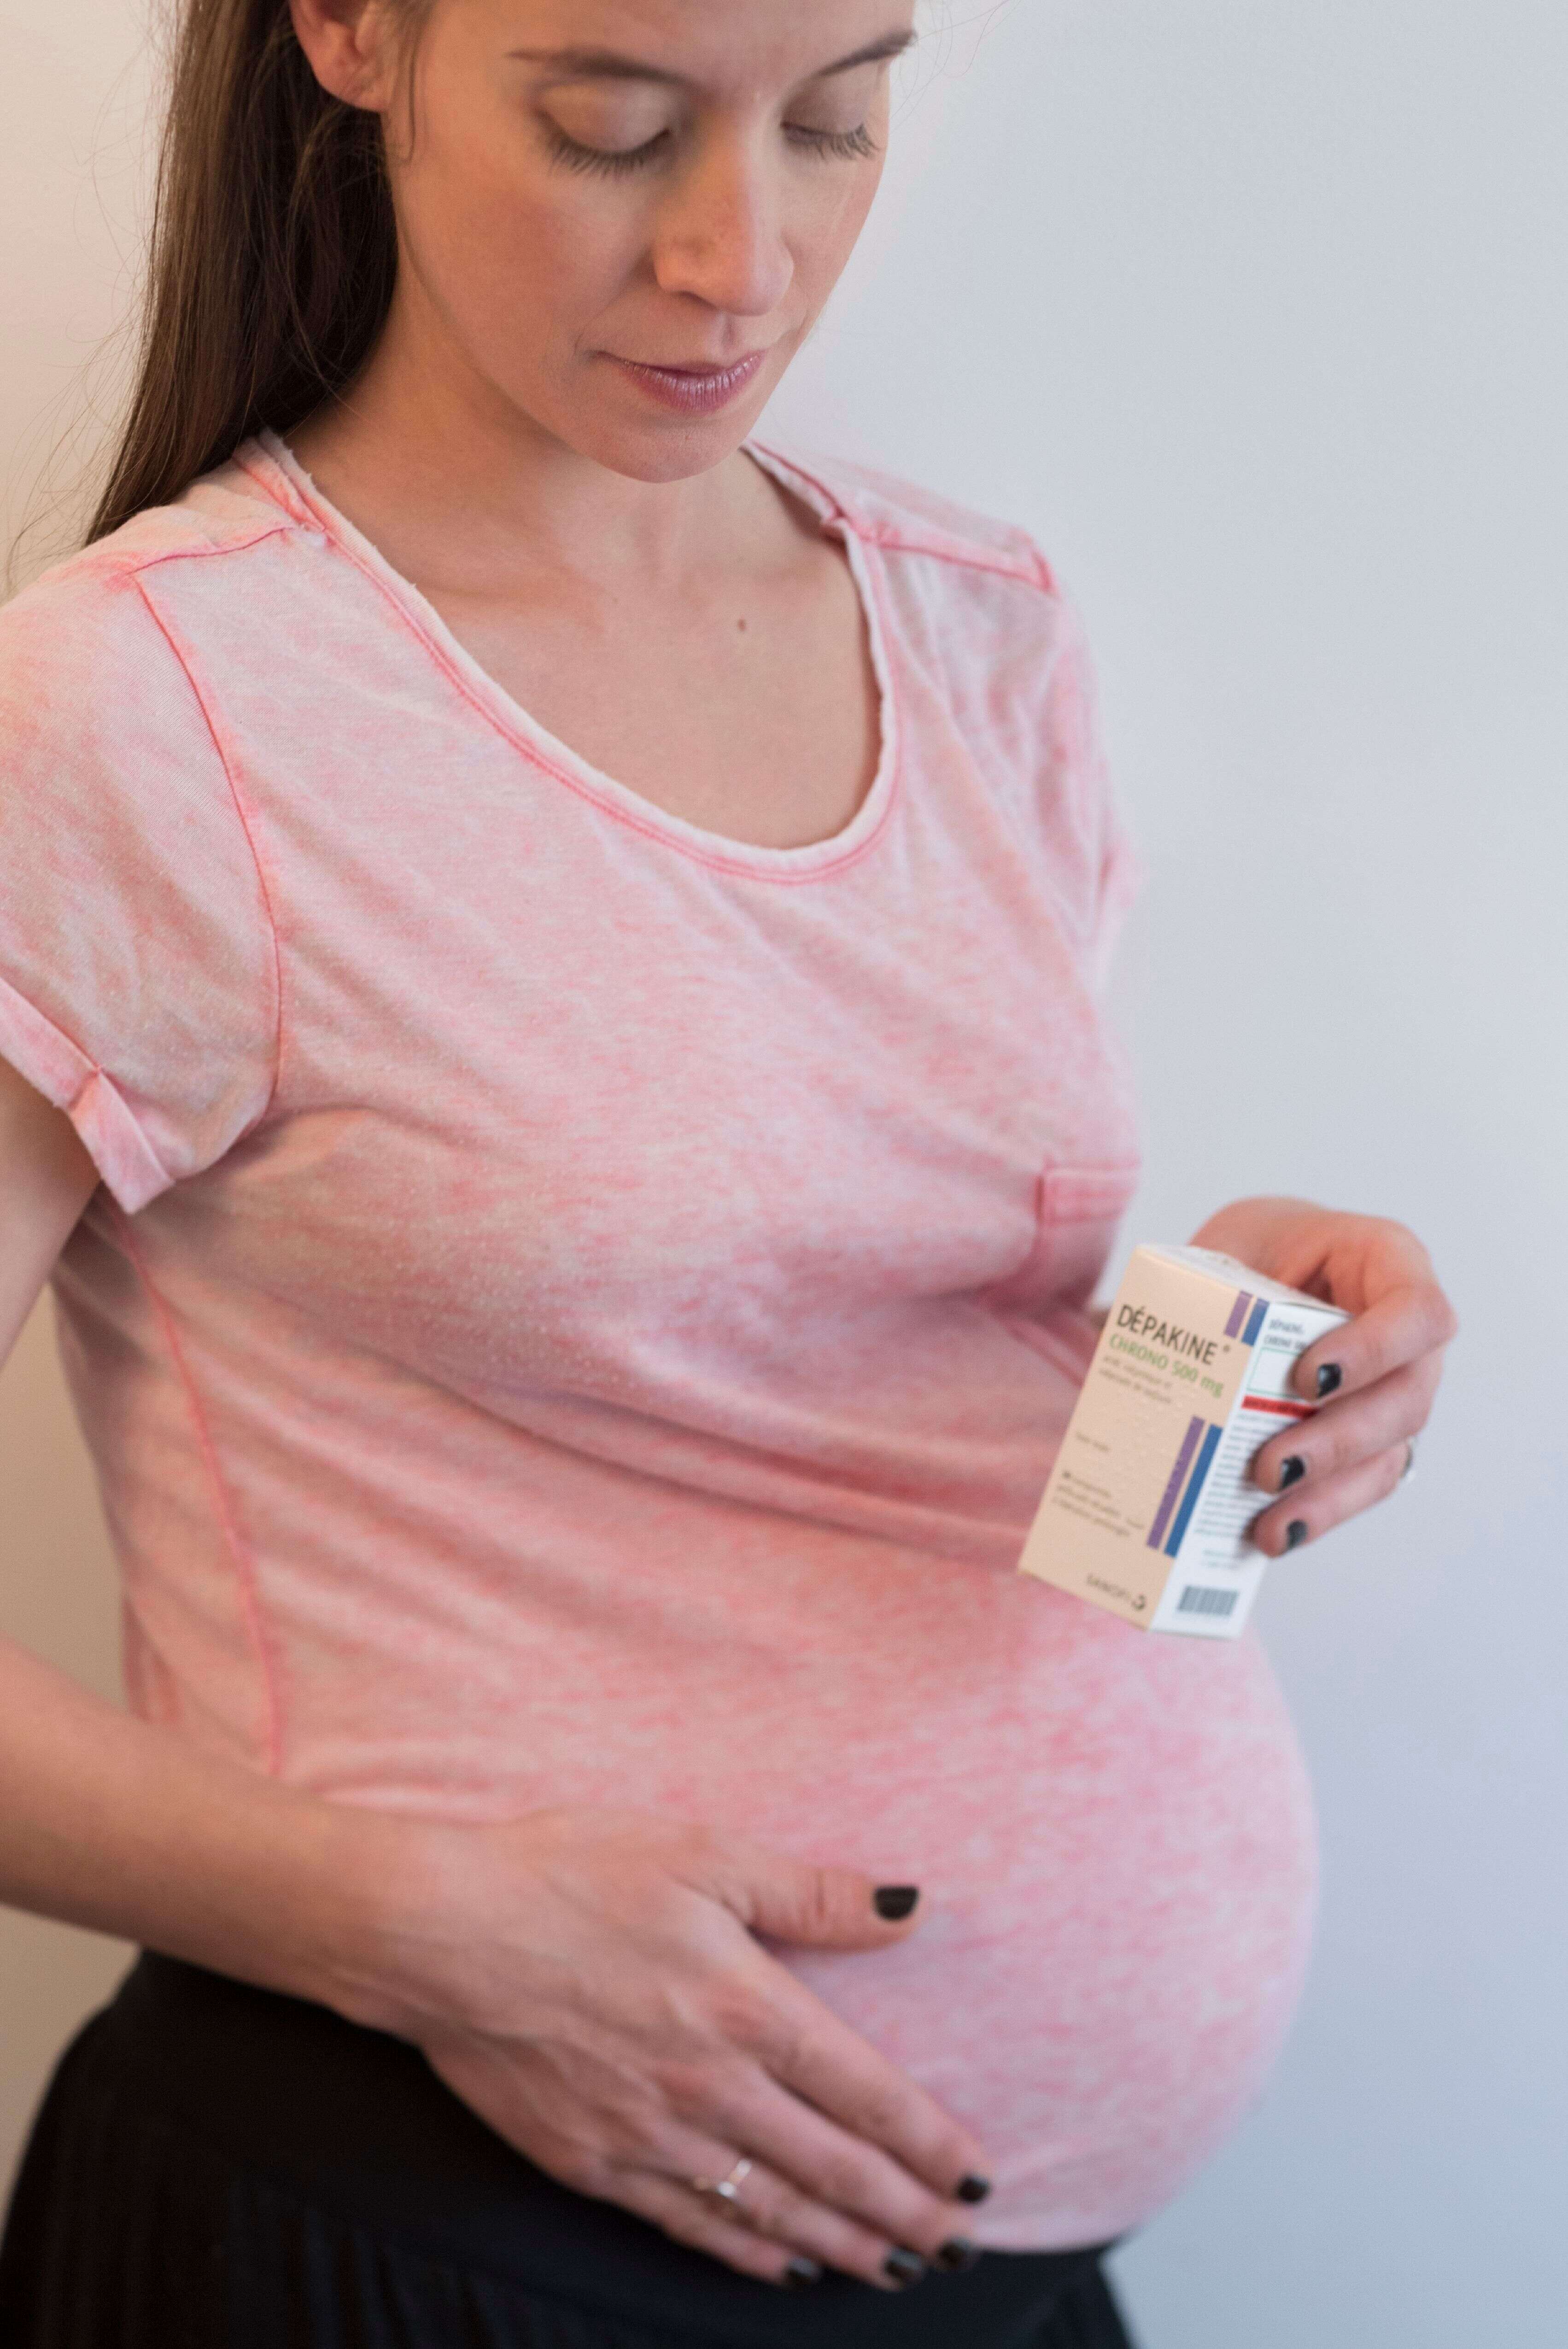 Pregnant woman holding a box of Depakine, Valproic Acid, used to treat seizures. (Photo by: BSIP/Universal Images Group via Getty Images)